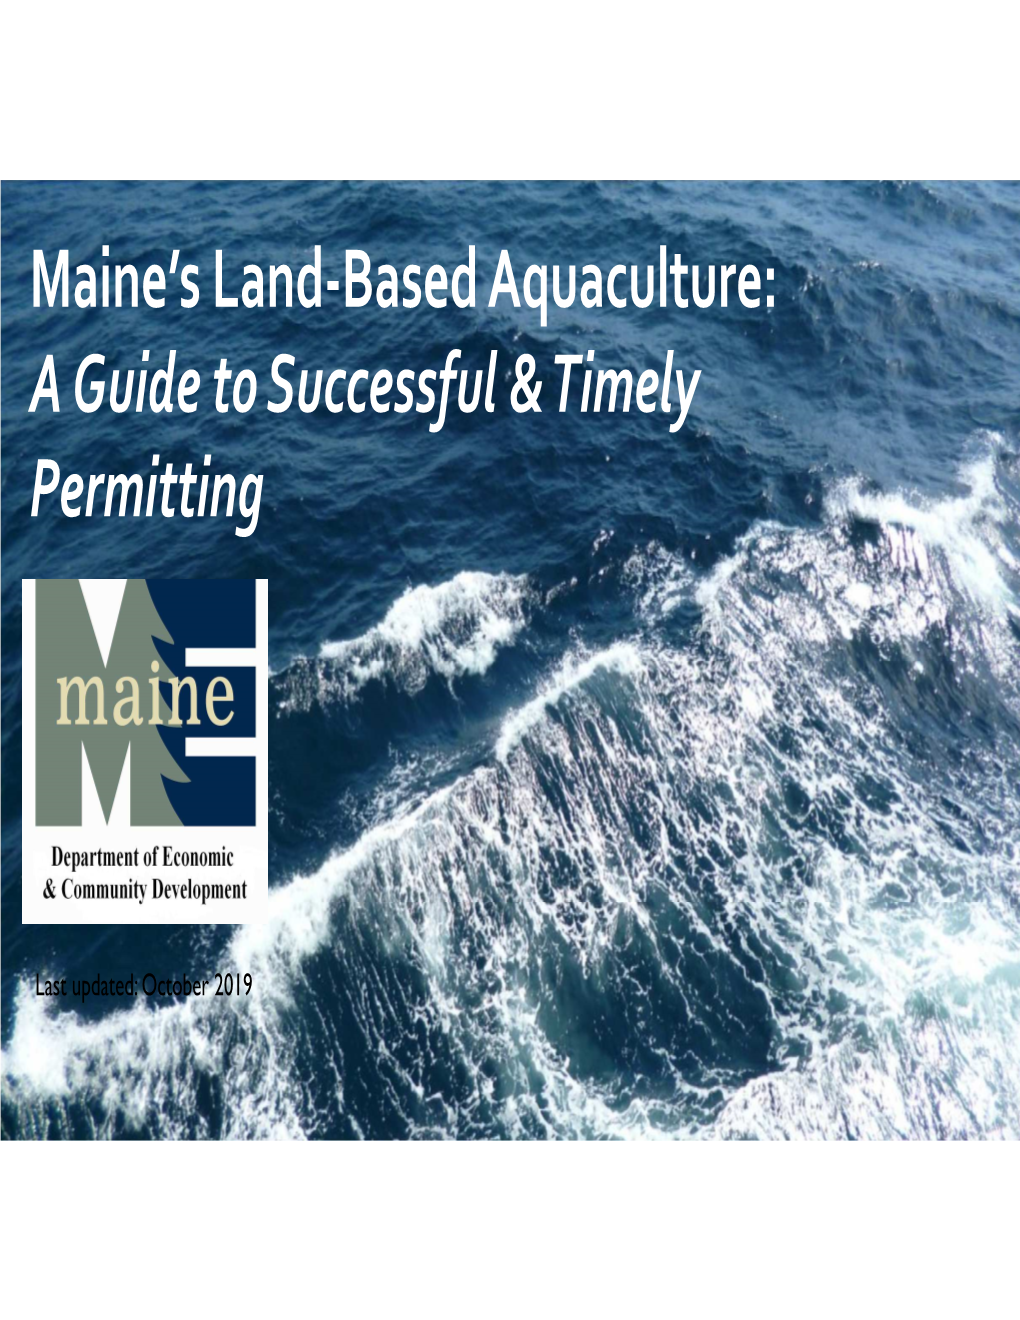 A Guide to Successful & Timely Permitting